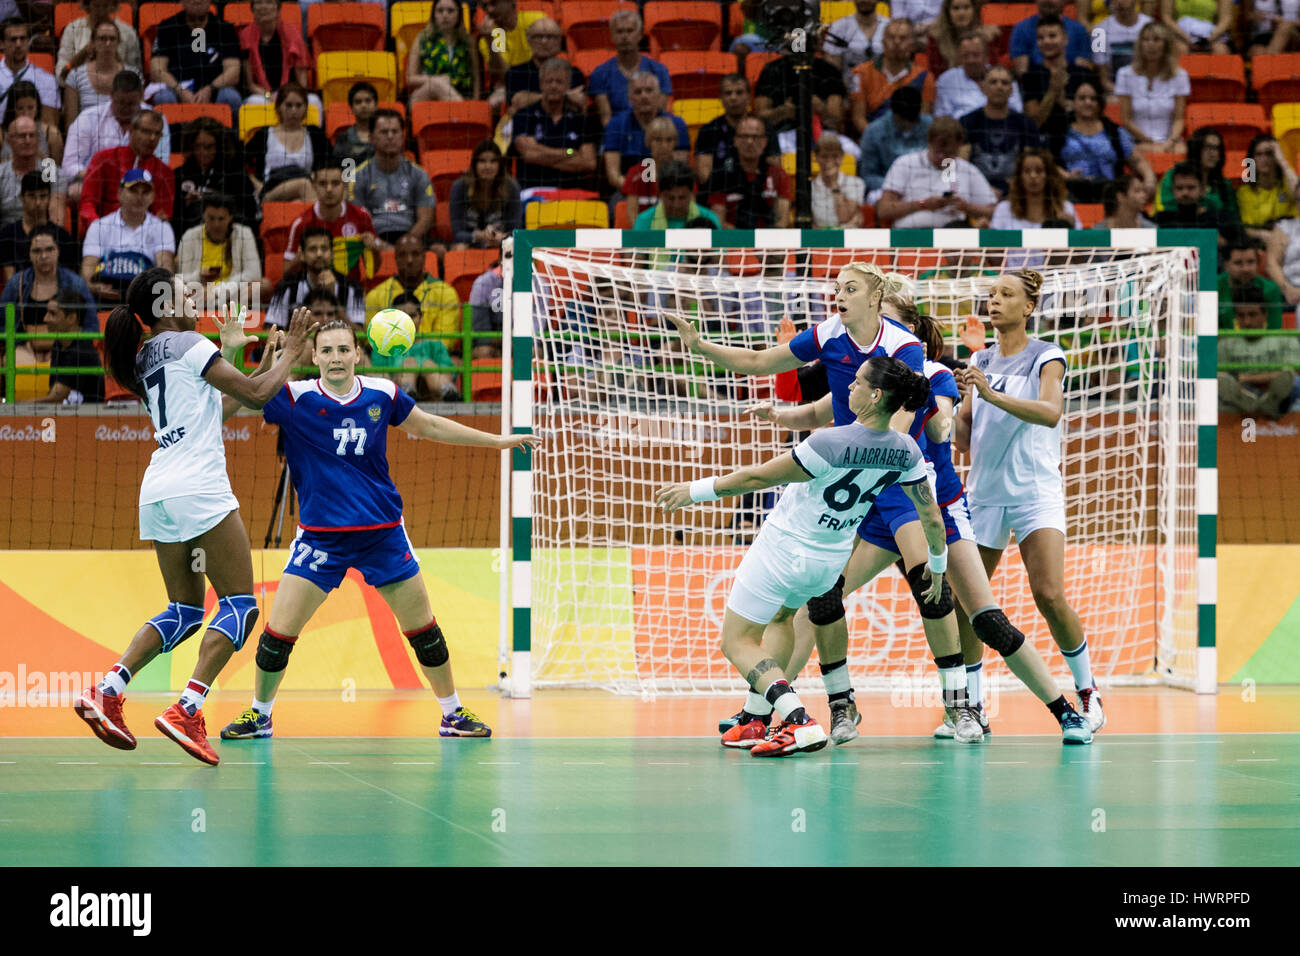 Rio de Janeiro, Brazil. 20 August 2016  Alexandra Lacrabère (FRA) #64 competes in the women's handball gold medal match Russia vs. France at the 2016  Stock Photo